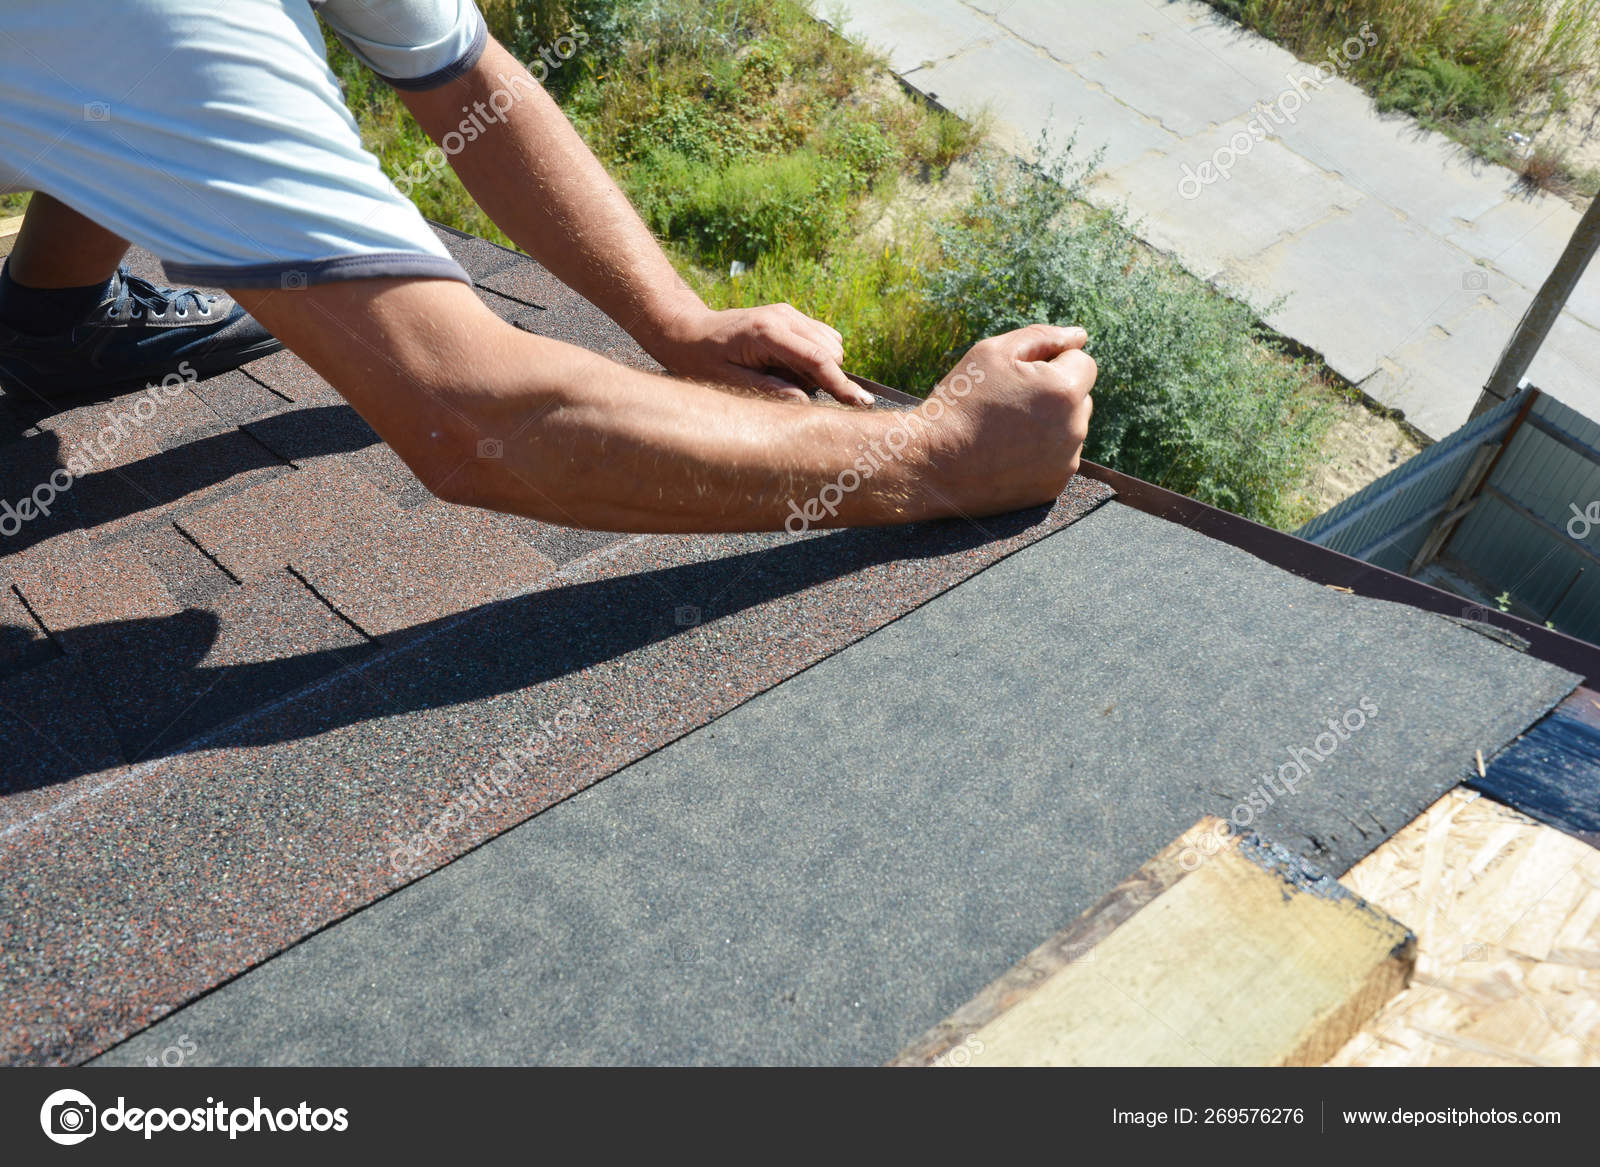 Roofer contractor gluing waterproof membrane on wooden roof top surface  with black bitumen spray on tar and laying asphalt shingles, Roofing  construction. Stock Photo by ©thefutureis 269576276